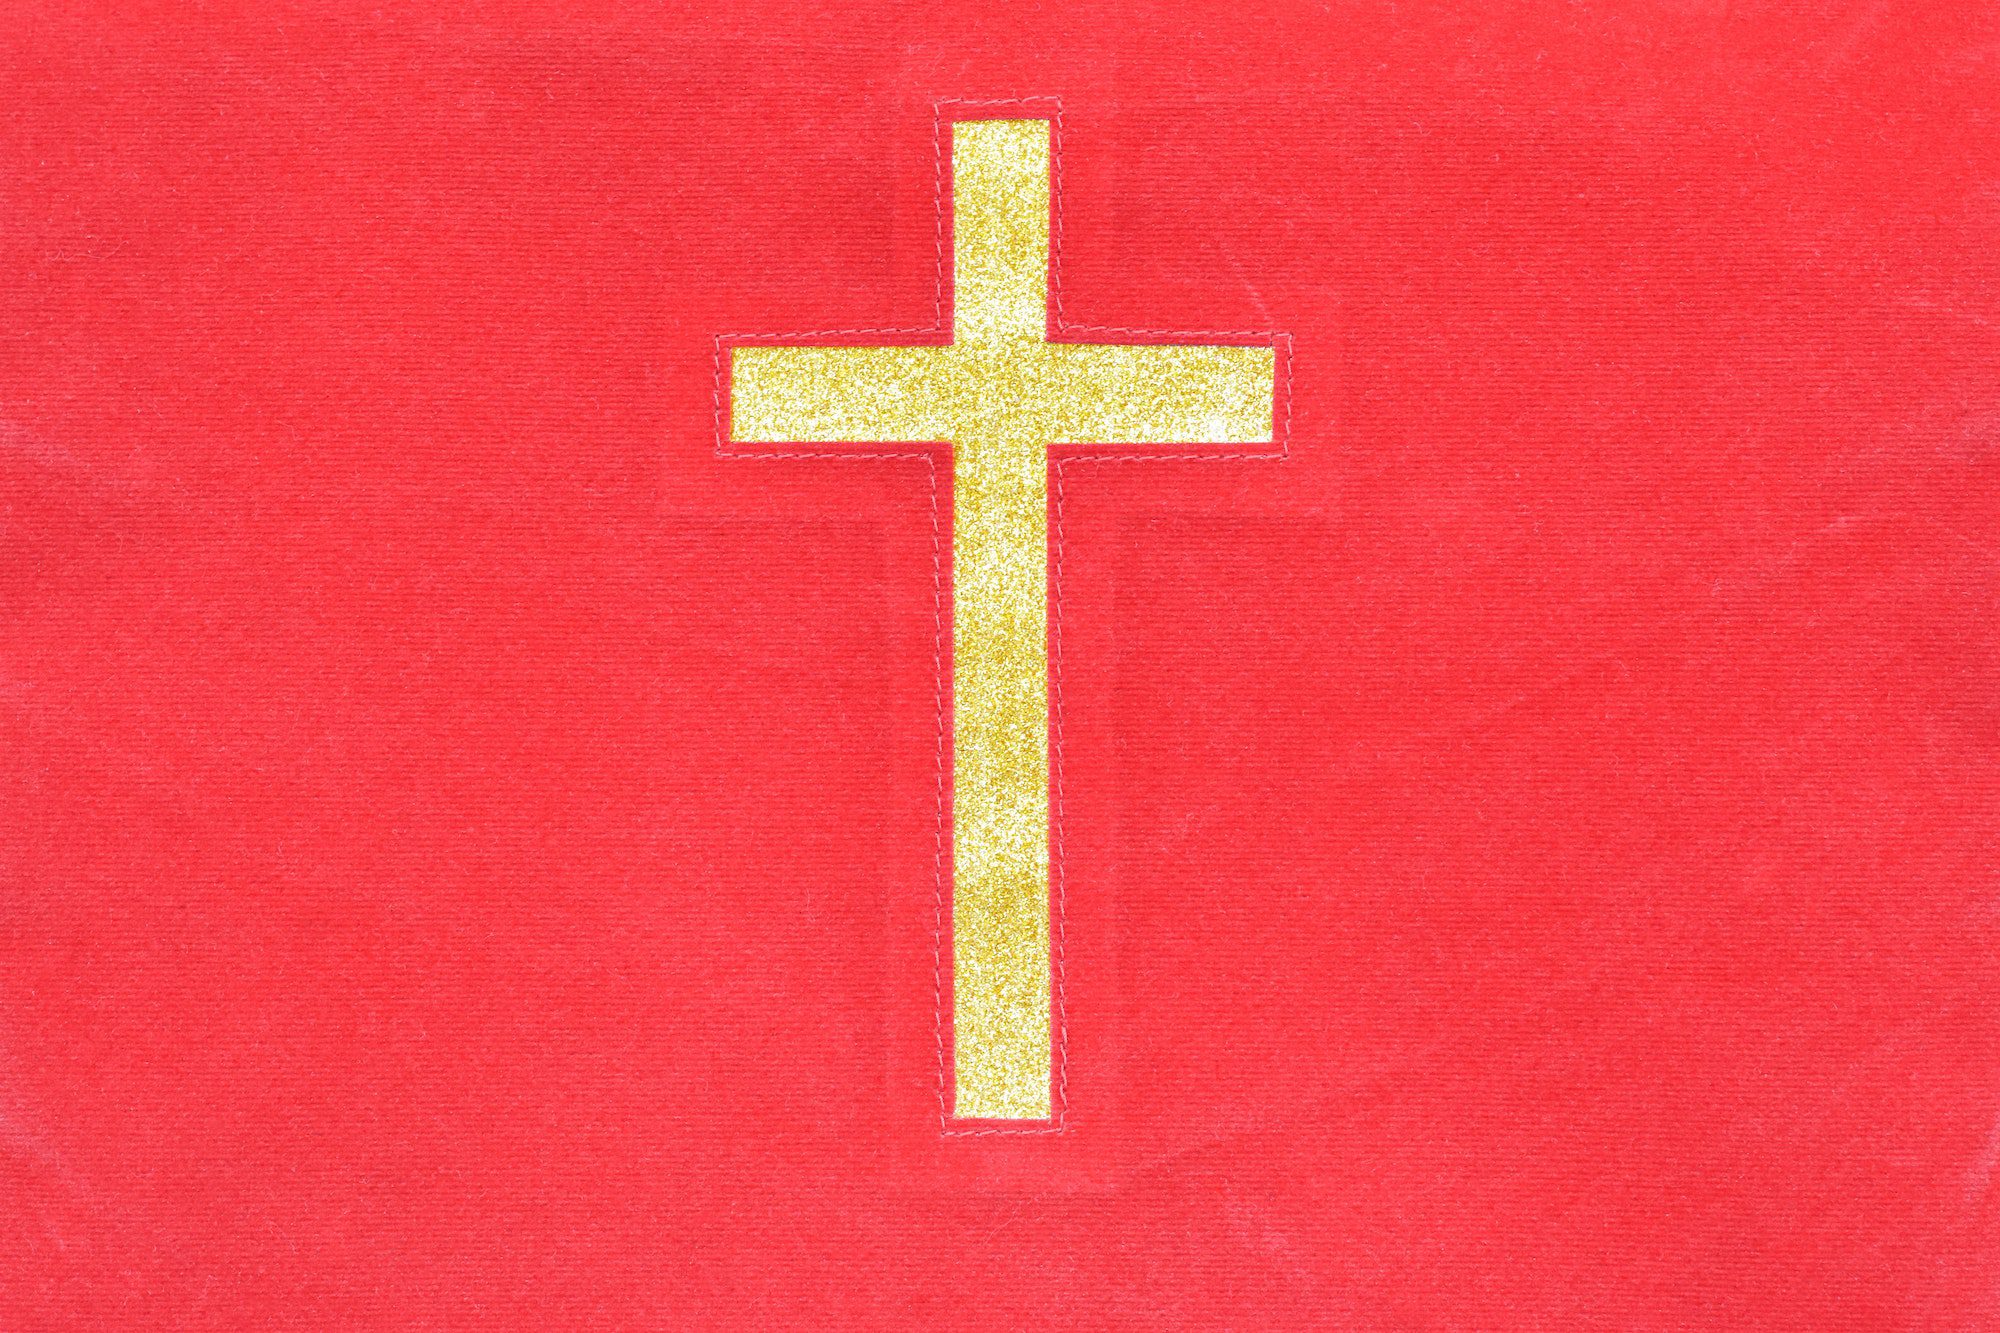 Gold catholic cross on red cloth texture